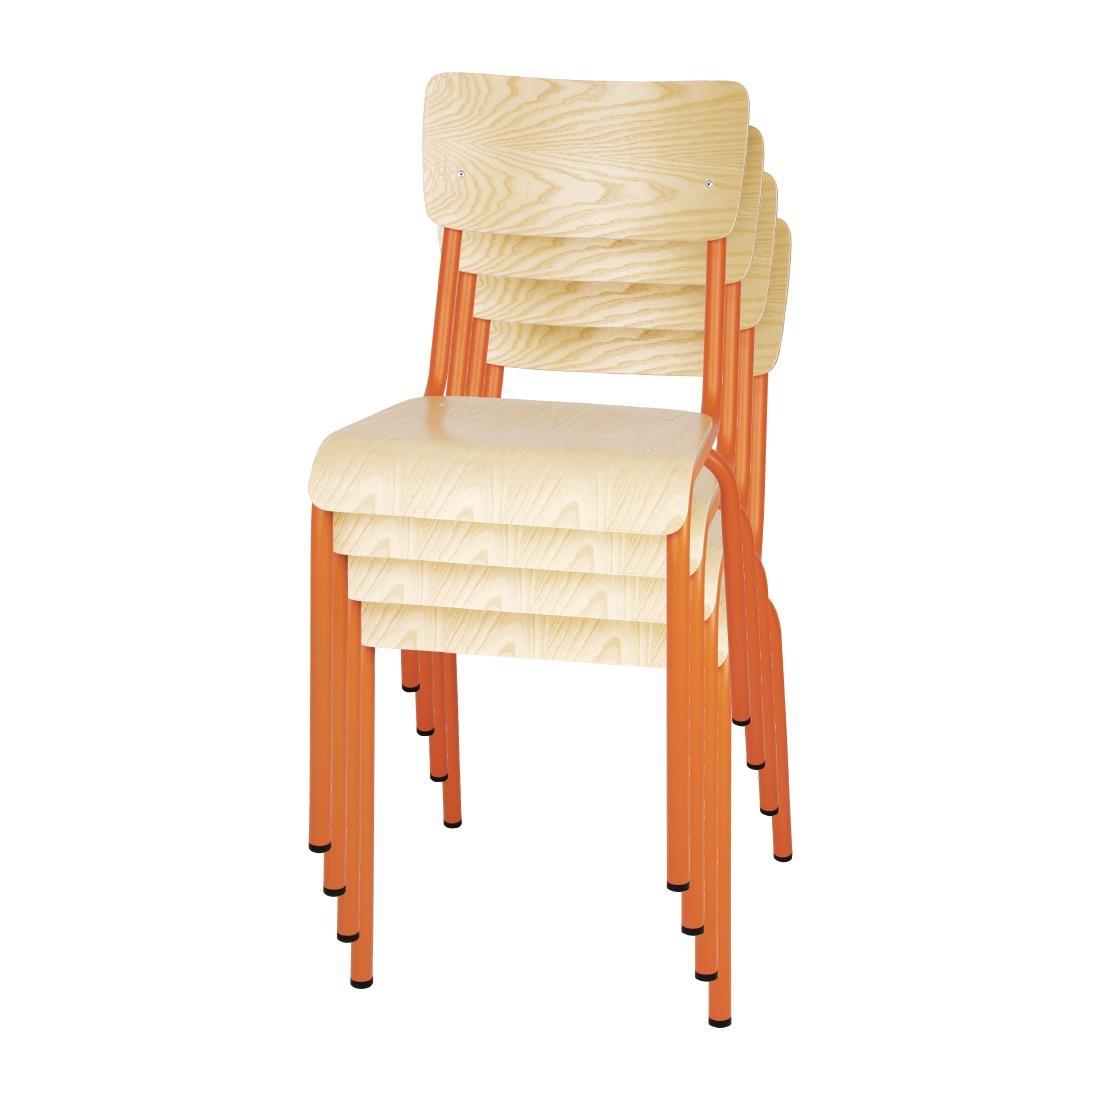 Bolero Cantina Side Chairs with Wooden Seat Pad and Backrest Orange (Pack of 4) - FB947  - 5